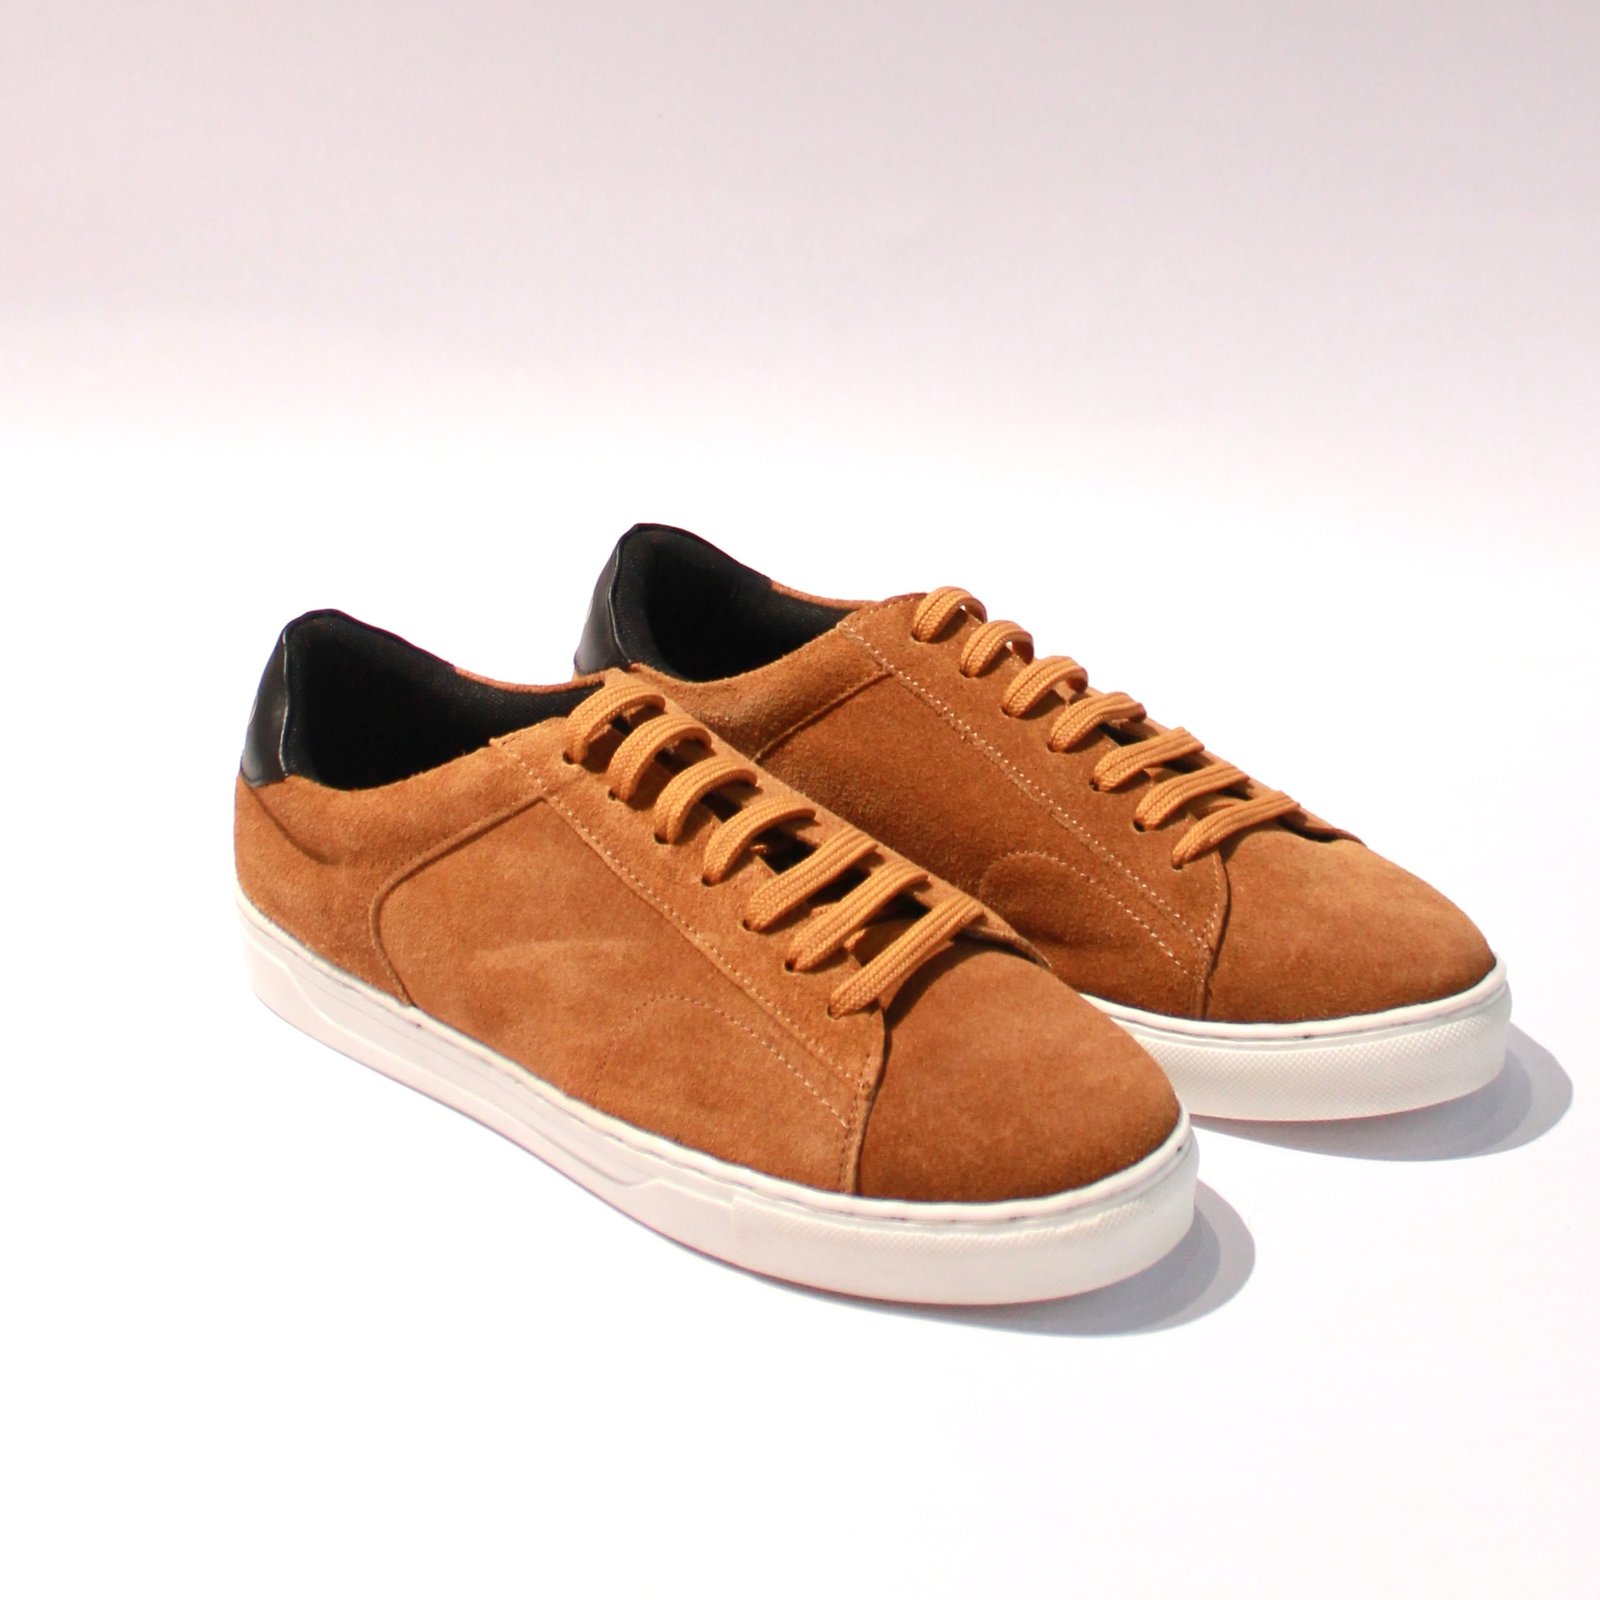 Catleo – Handcrafted Classy Footwear